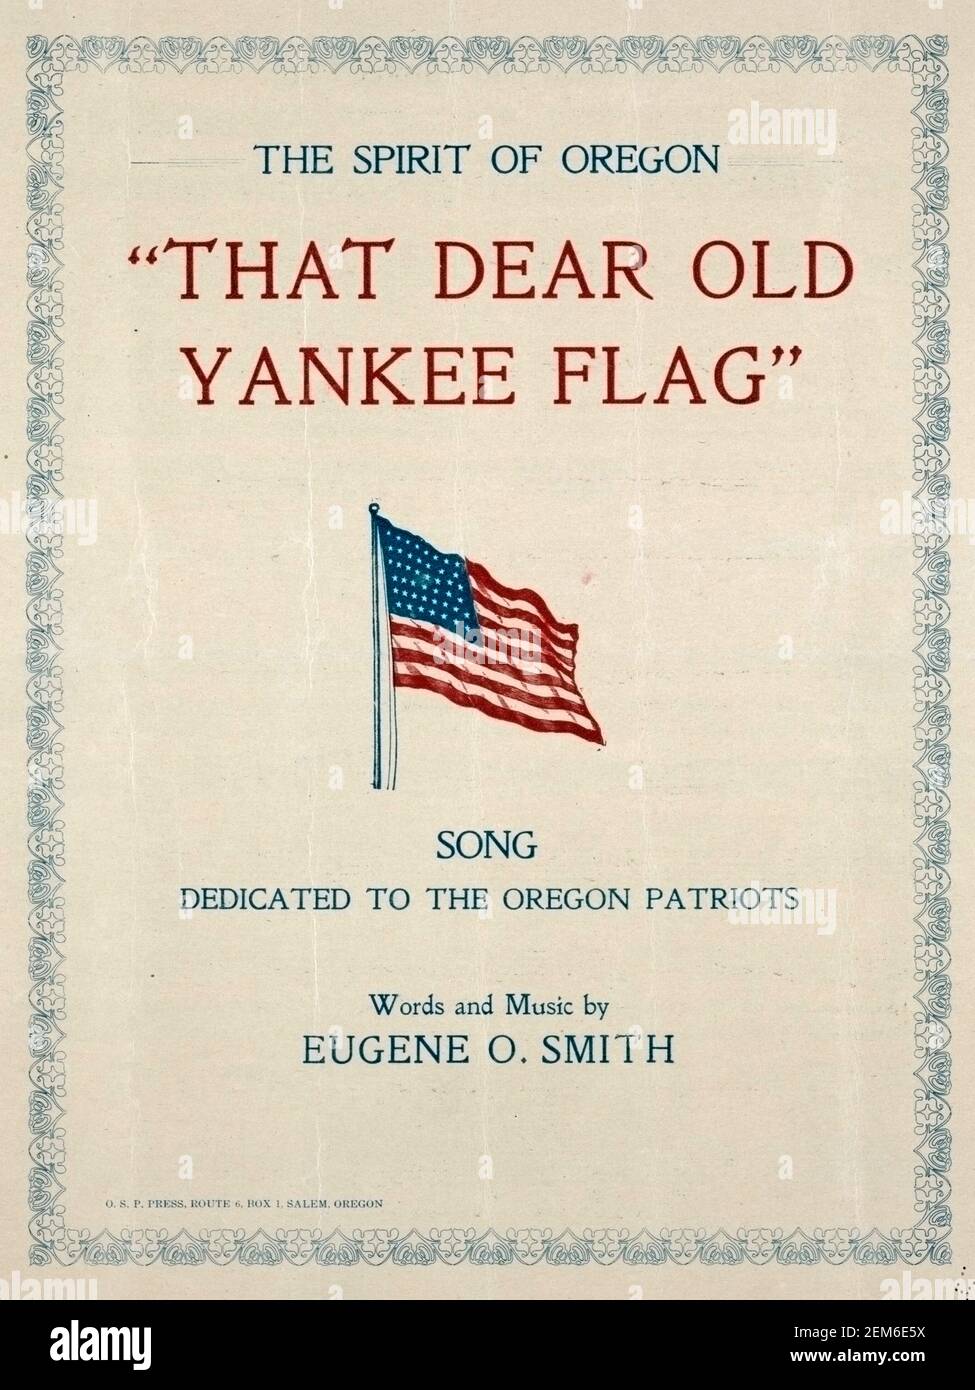 That dear old Yankee flag song dedicated to the Oregon patriots - Eugene O Smith, 1917 Stock Photo